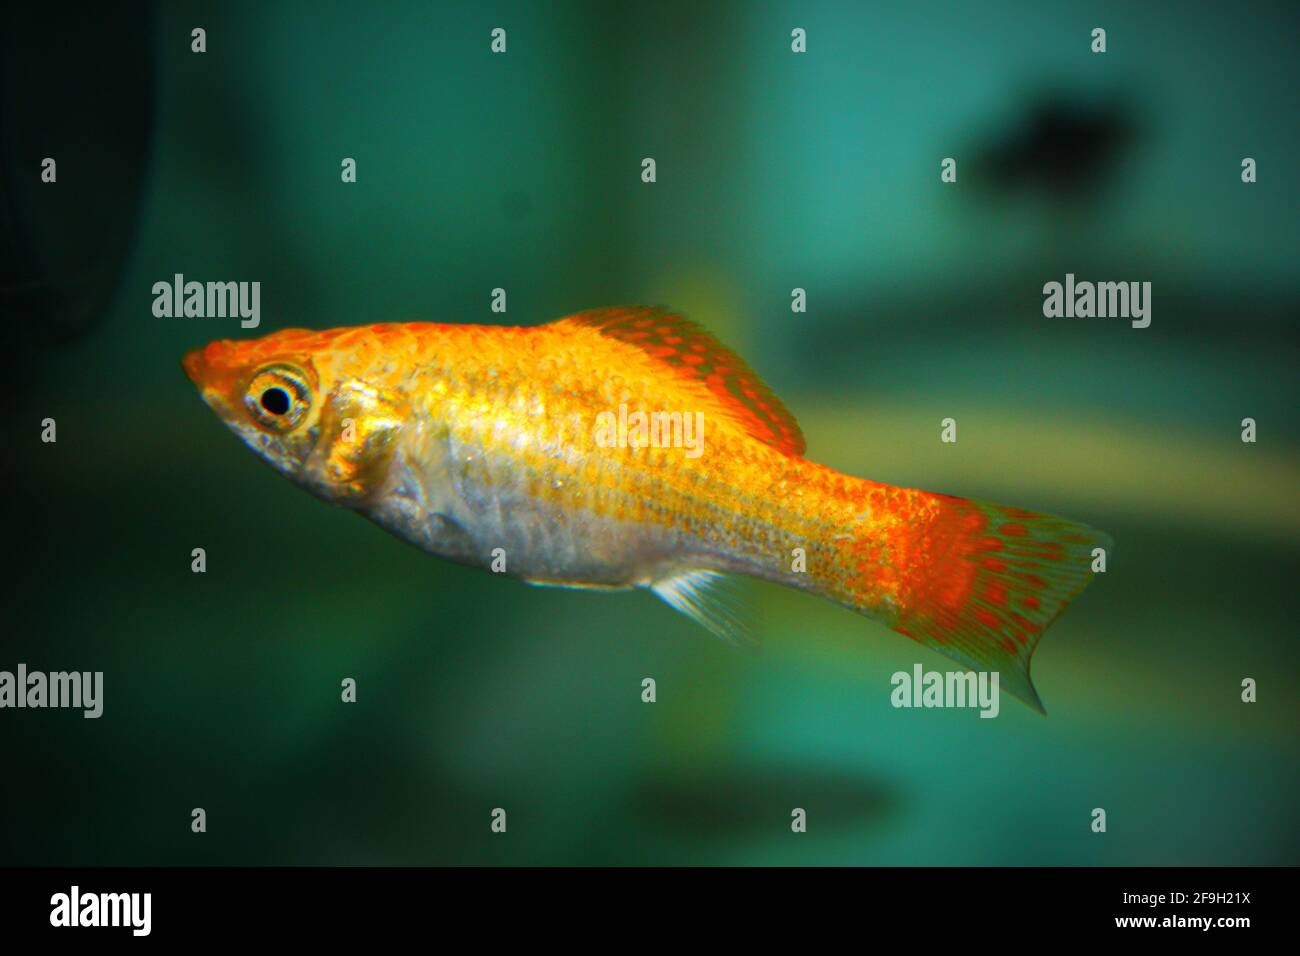 A closeup of common molly fish floating underwater Stock Photo